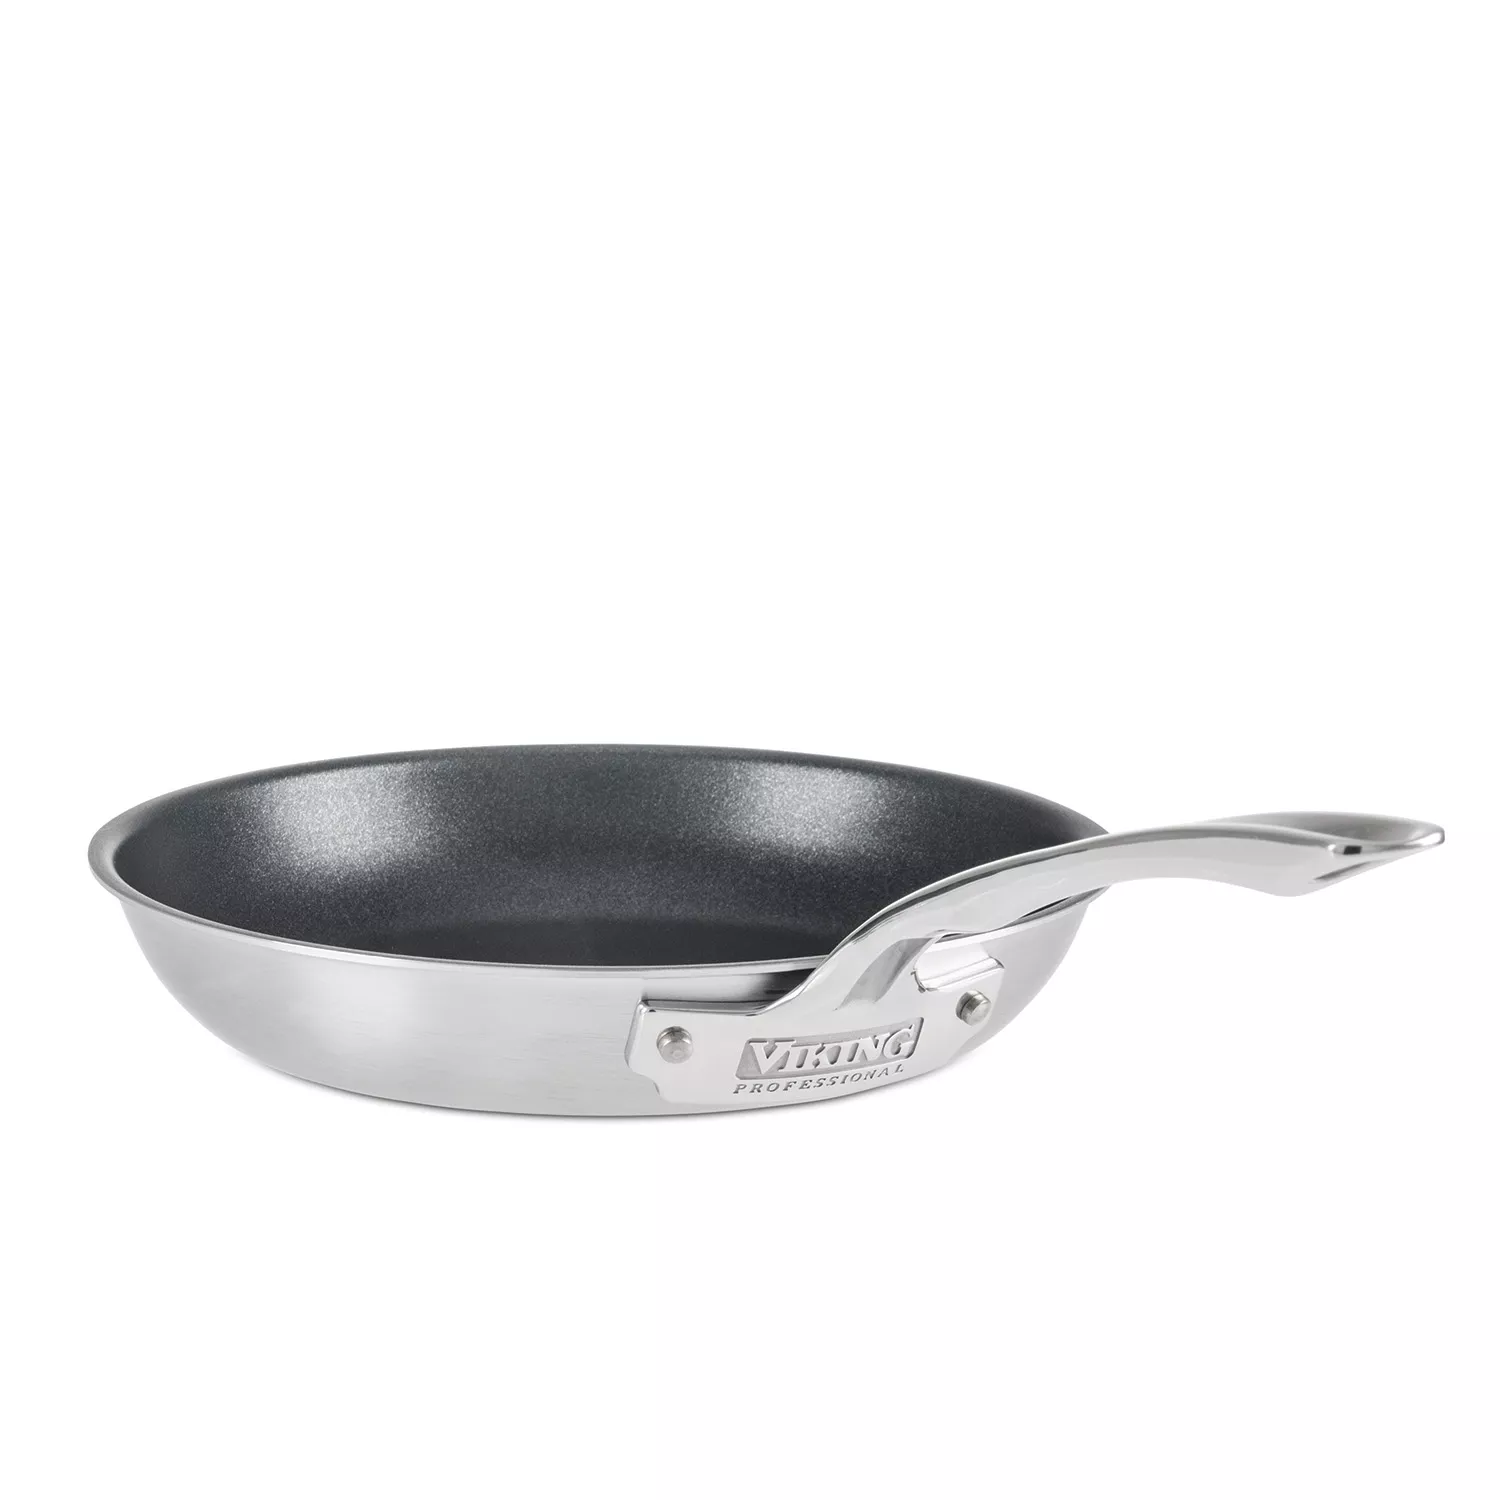 Photos - Pan VIKING Professional 5-Ply Stainless Steel Nonstick Skillet 4015-1N10S 